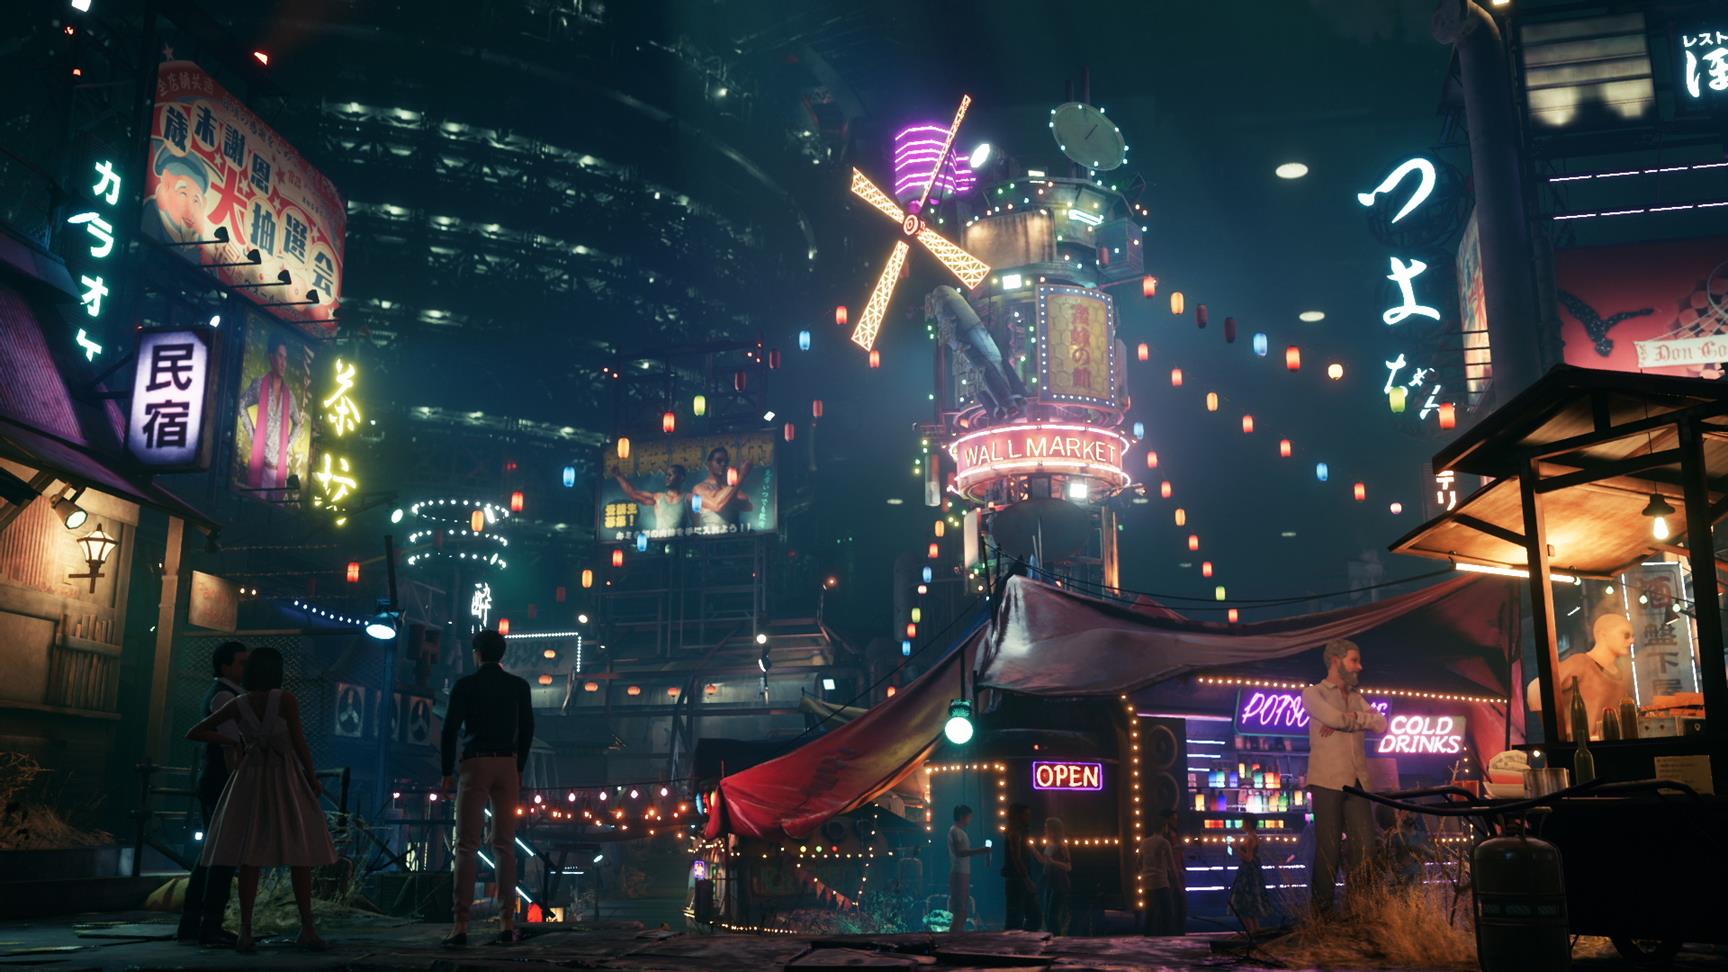 Image for Final Fantasy 7 Remake: get a good look at Wall Market, Honeybee Inn and more in new screens